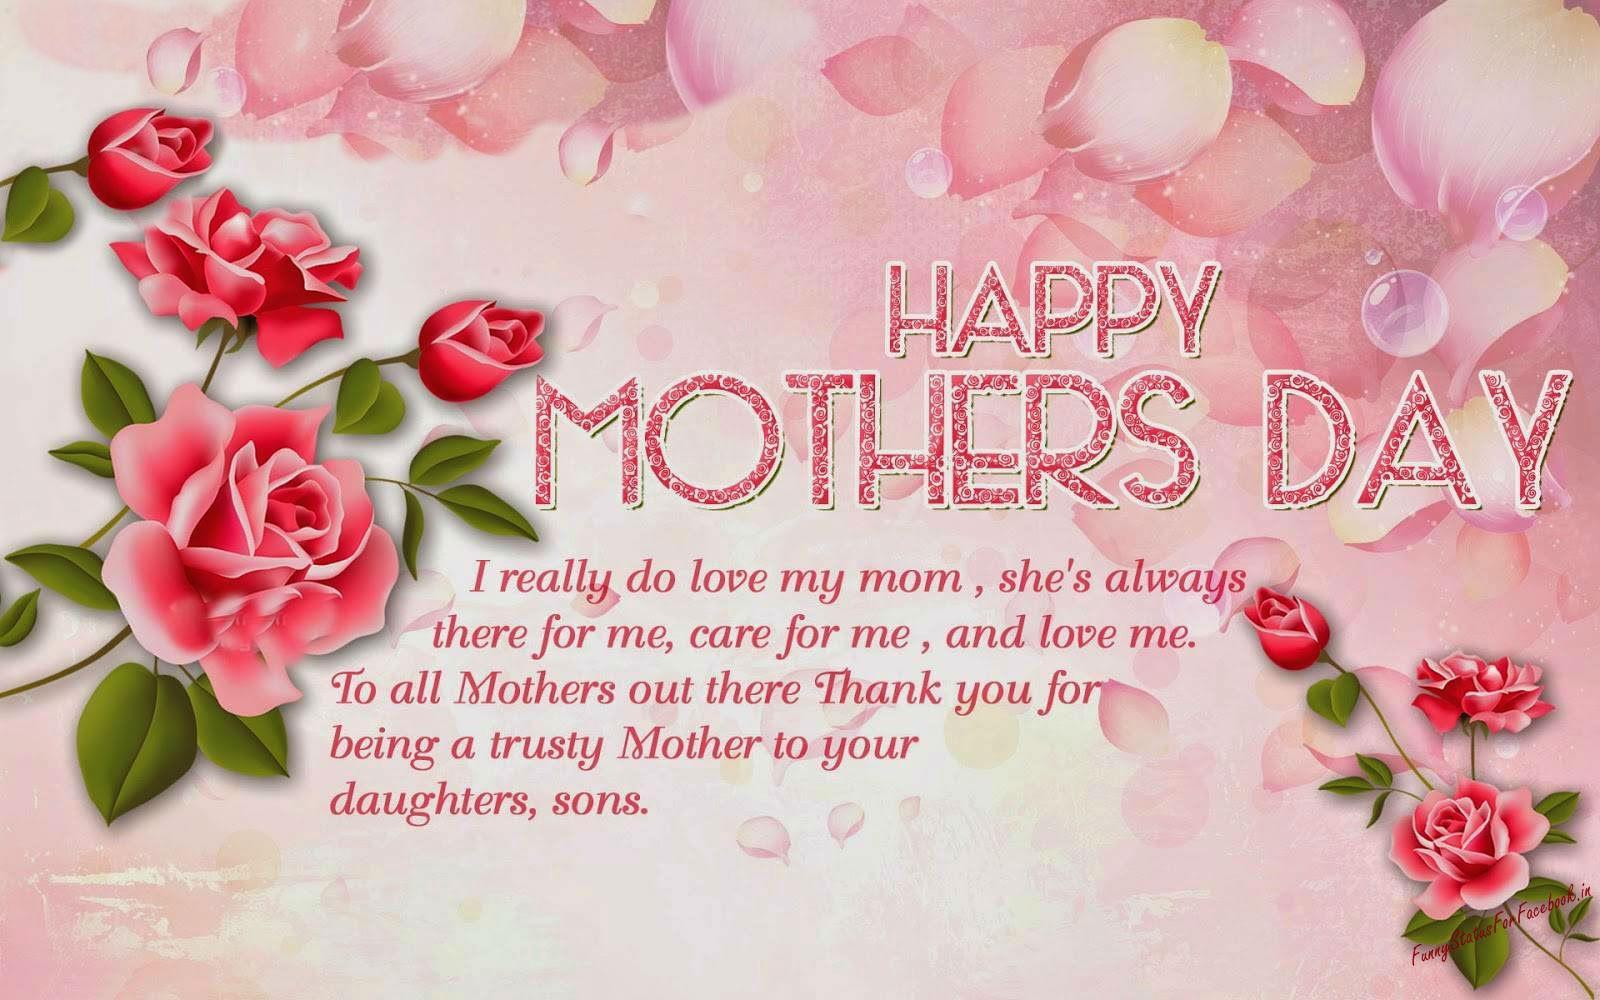 Mothers Day Image Happy Mothers Day Picture, Free